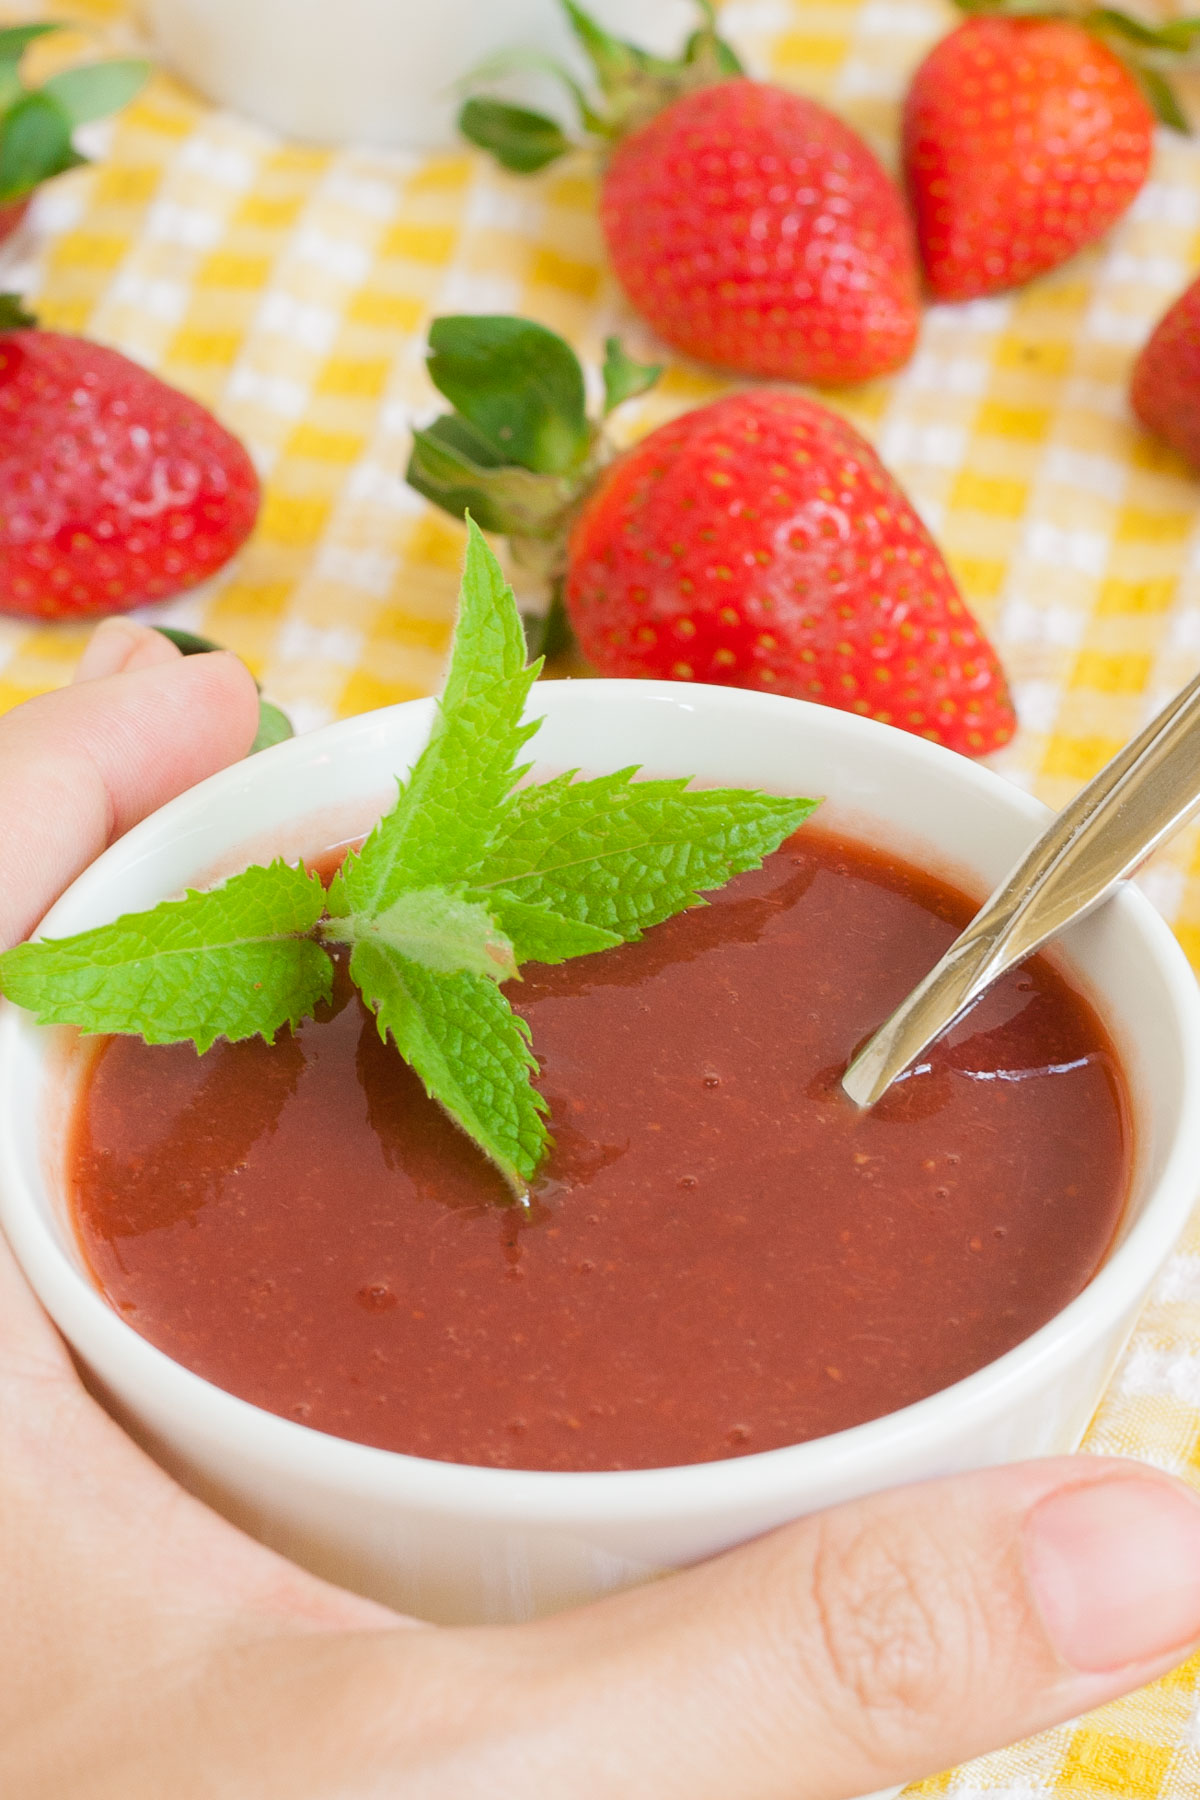 A hand is holding a small white bowl with strawberry puree and some mint leaves. More fresh strawberries are scattered around it on a yellow tablecloth.